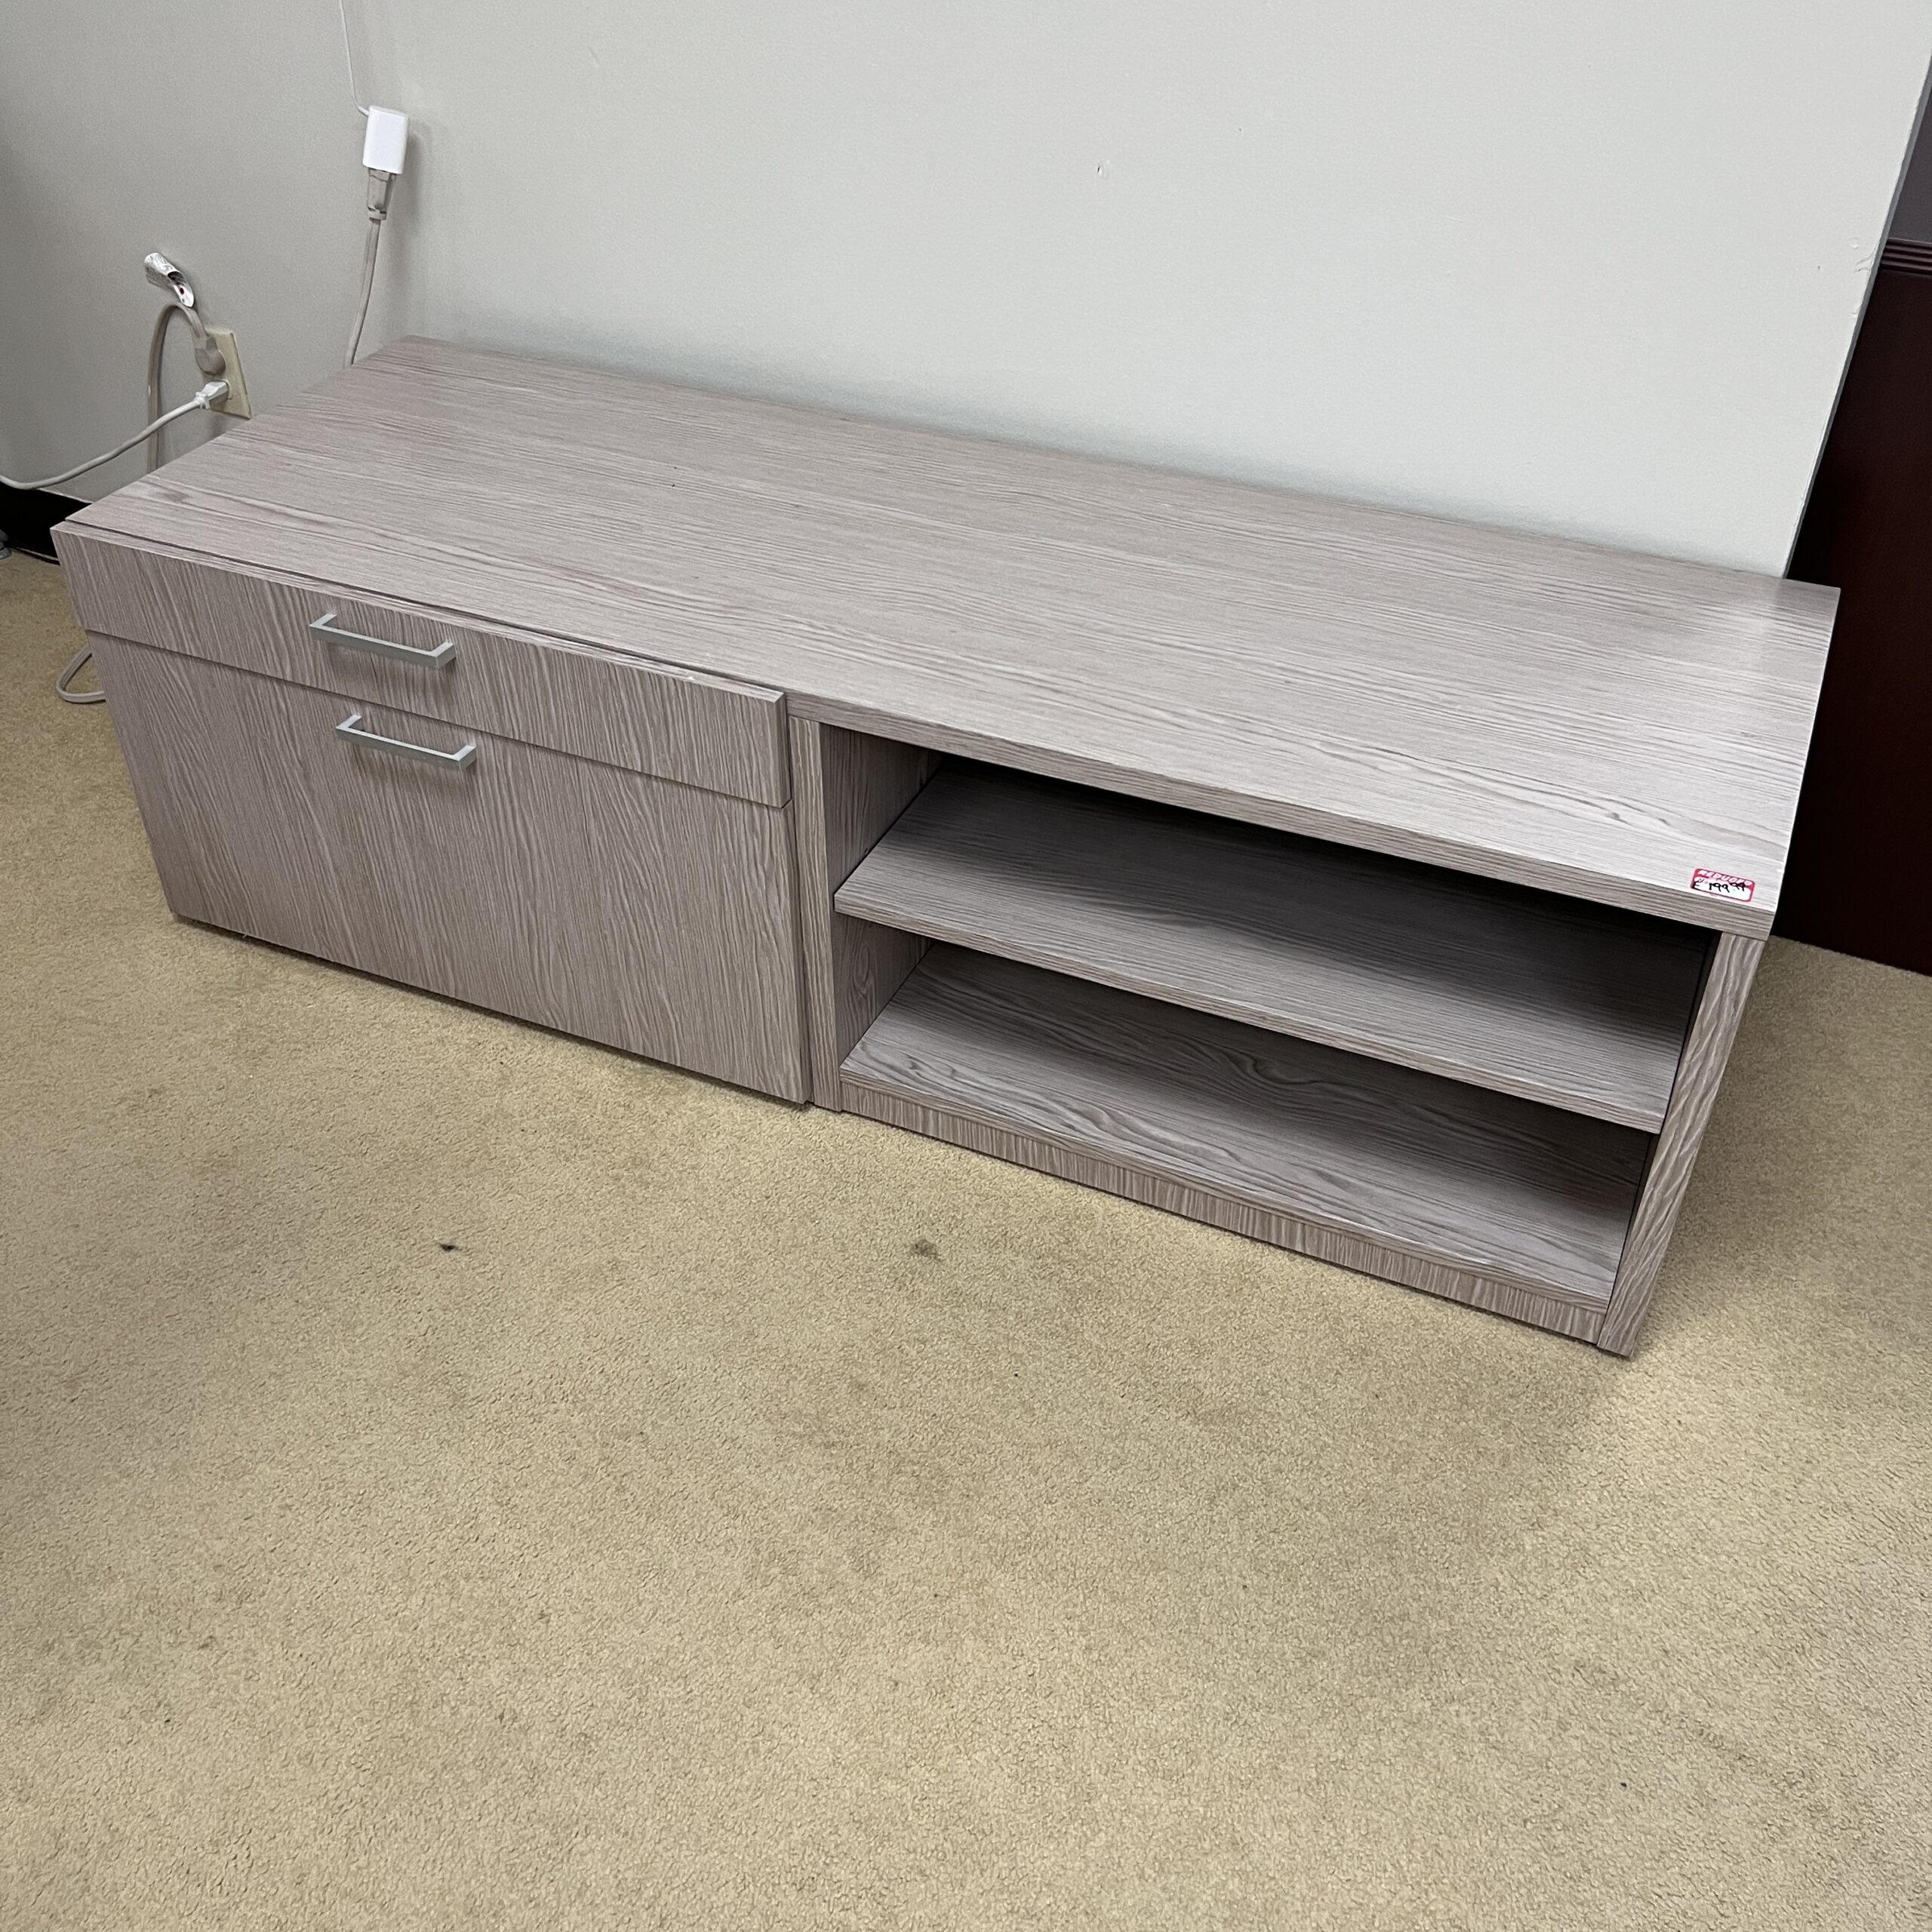 weathered grey taupe woodgrain laminate with silver pulls. credenza and one lateral file